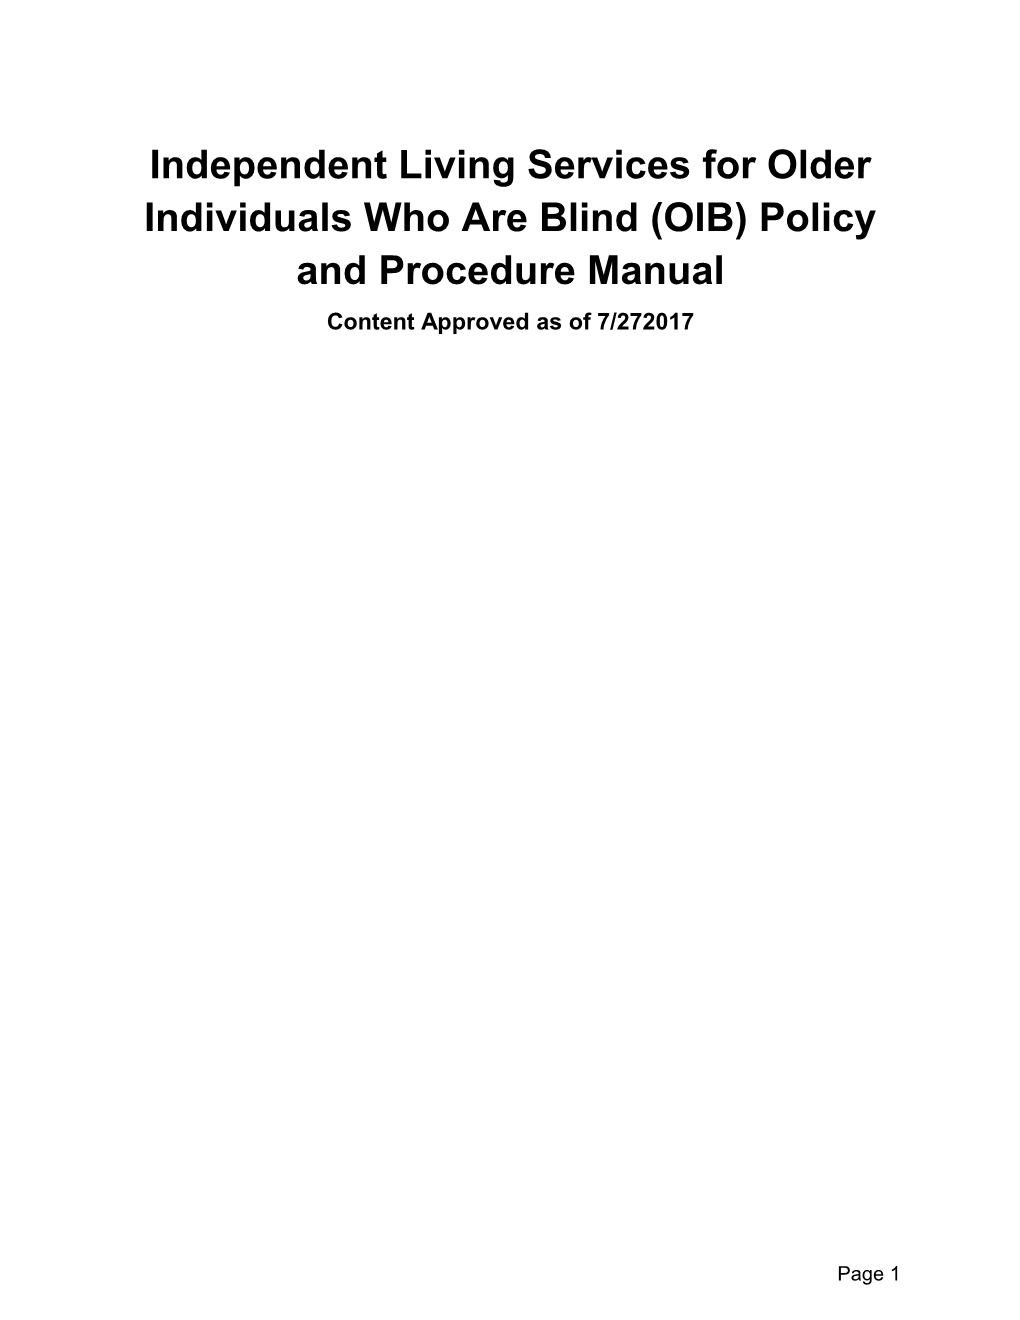 Independent Living Services for Older Individuals Who Are Blind Policies and Procedures Manual